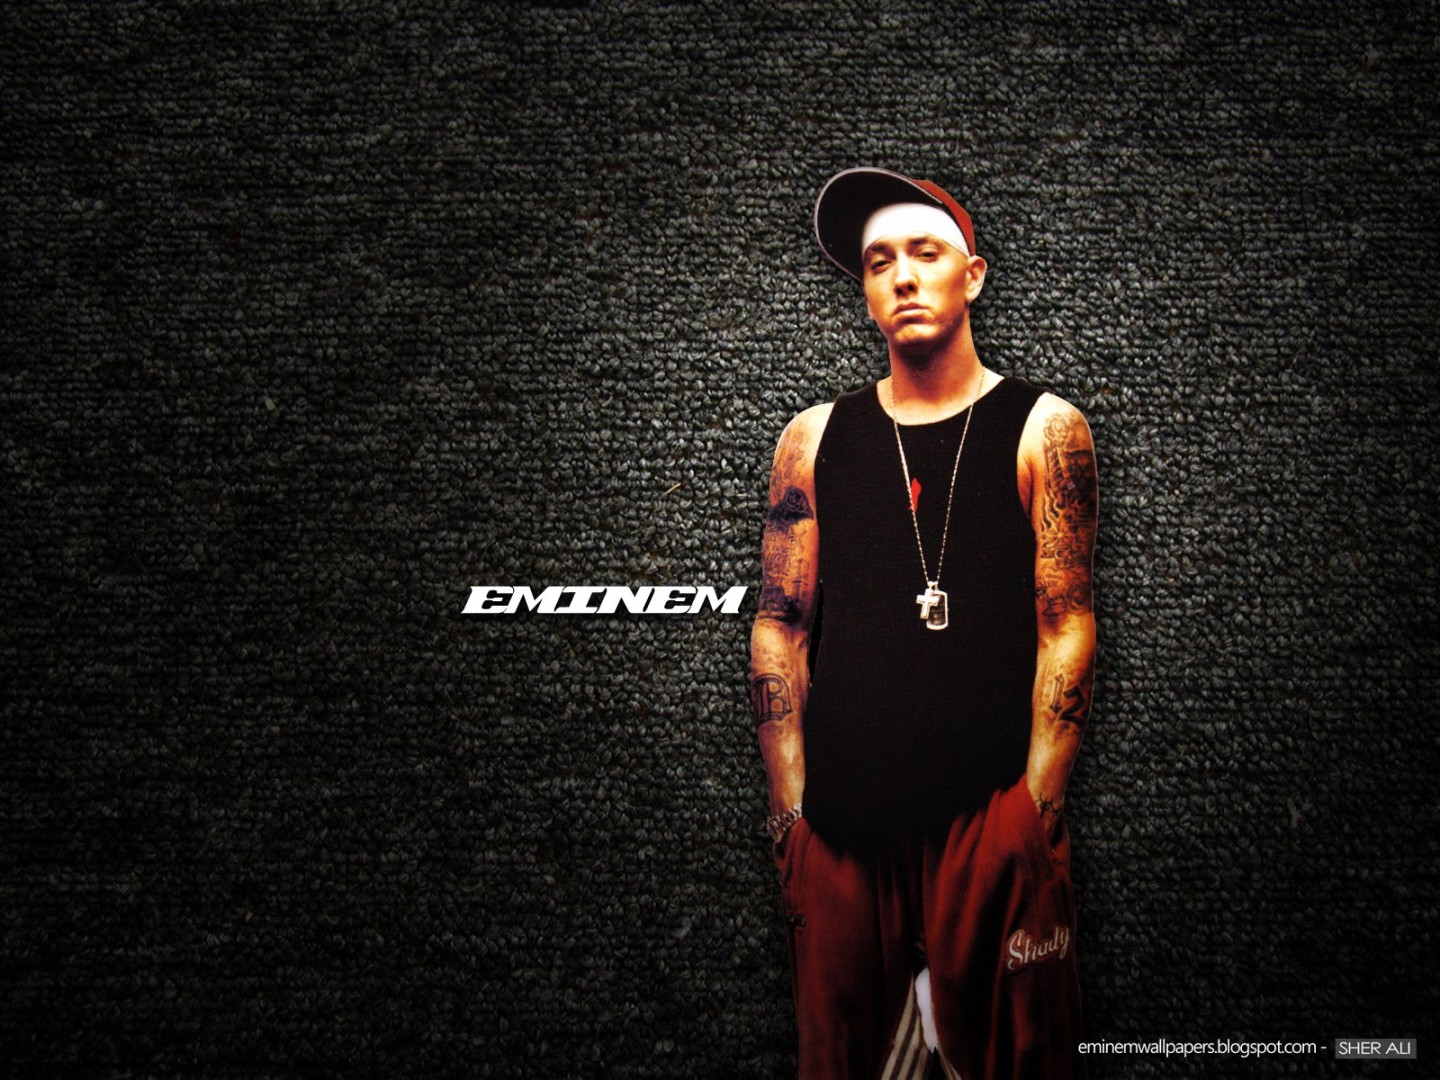 Eminem hd wallpapers for phone download mp3